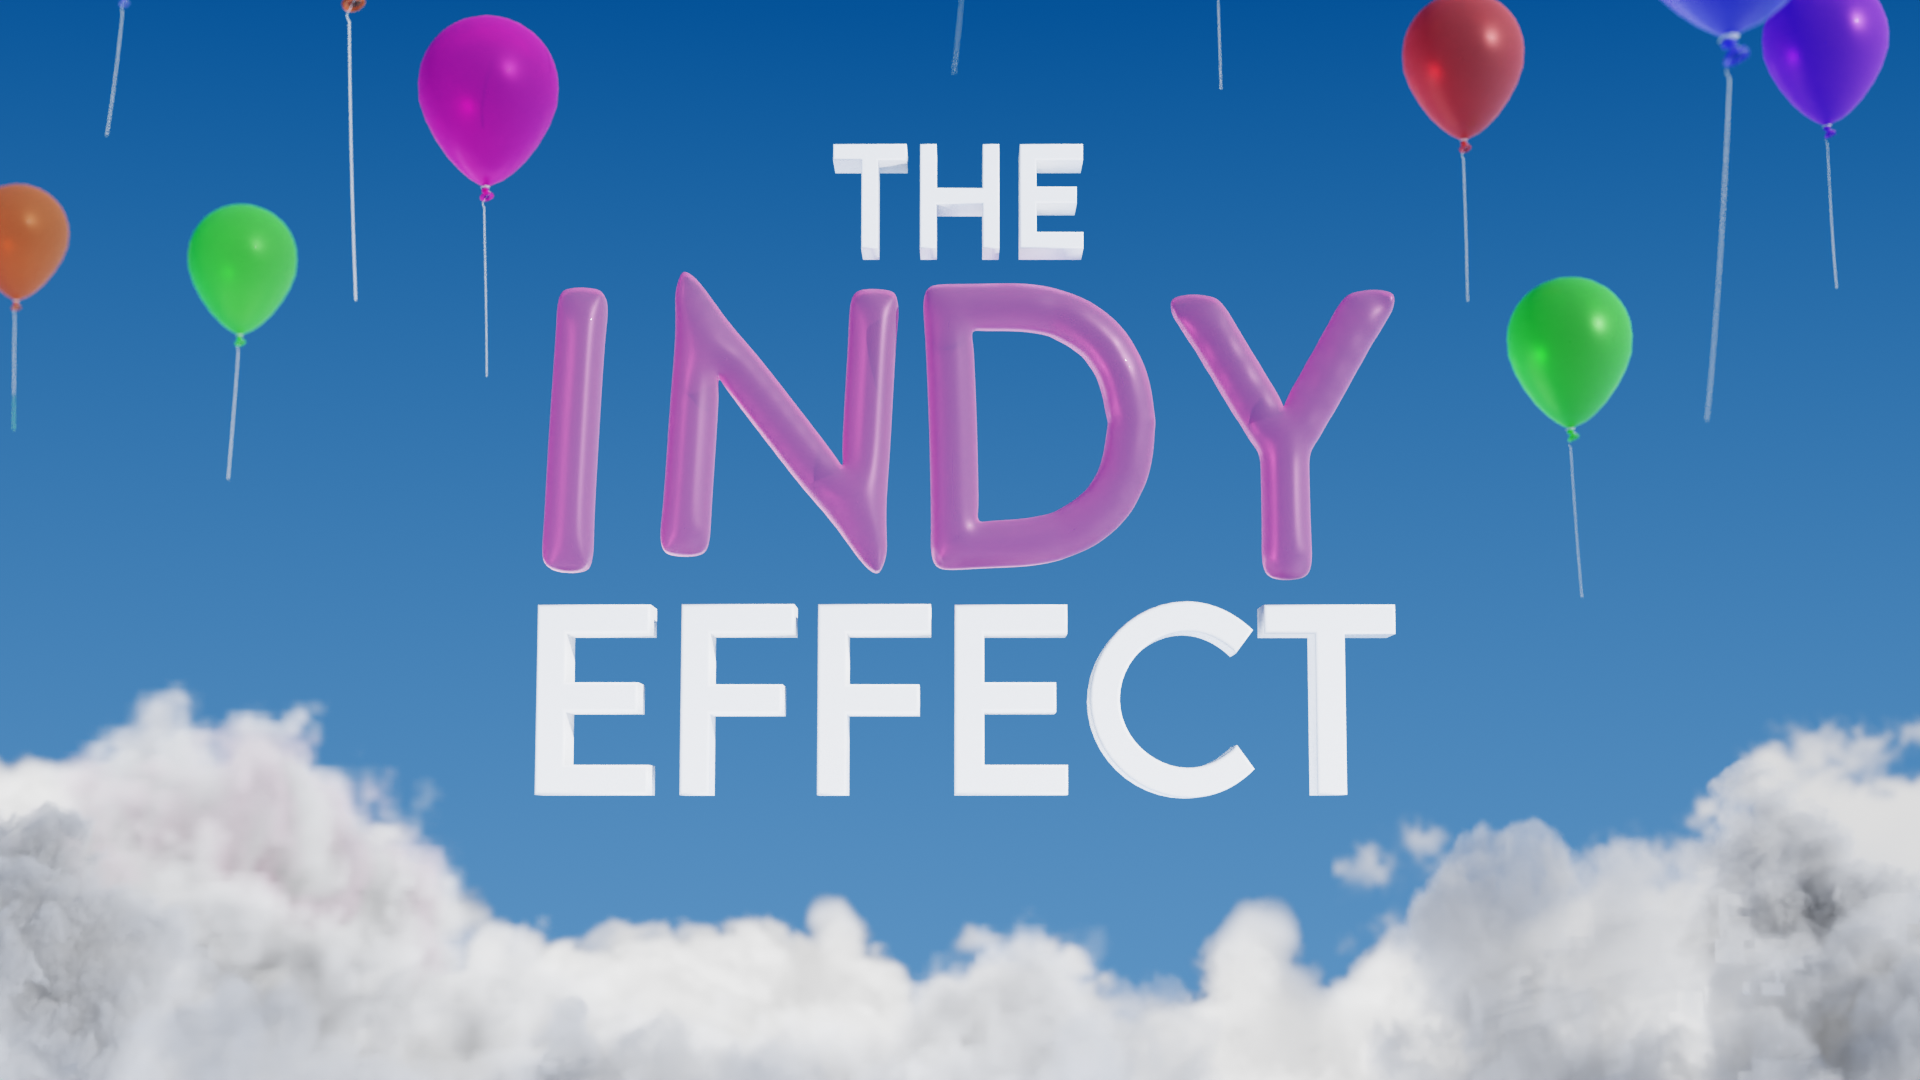 The Indy Effect...